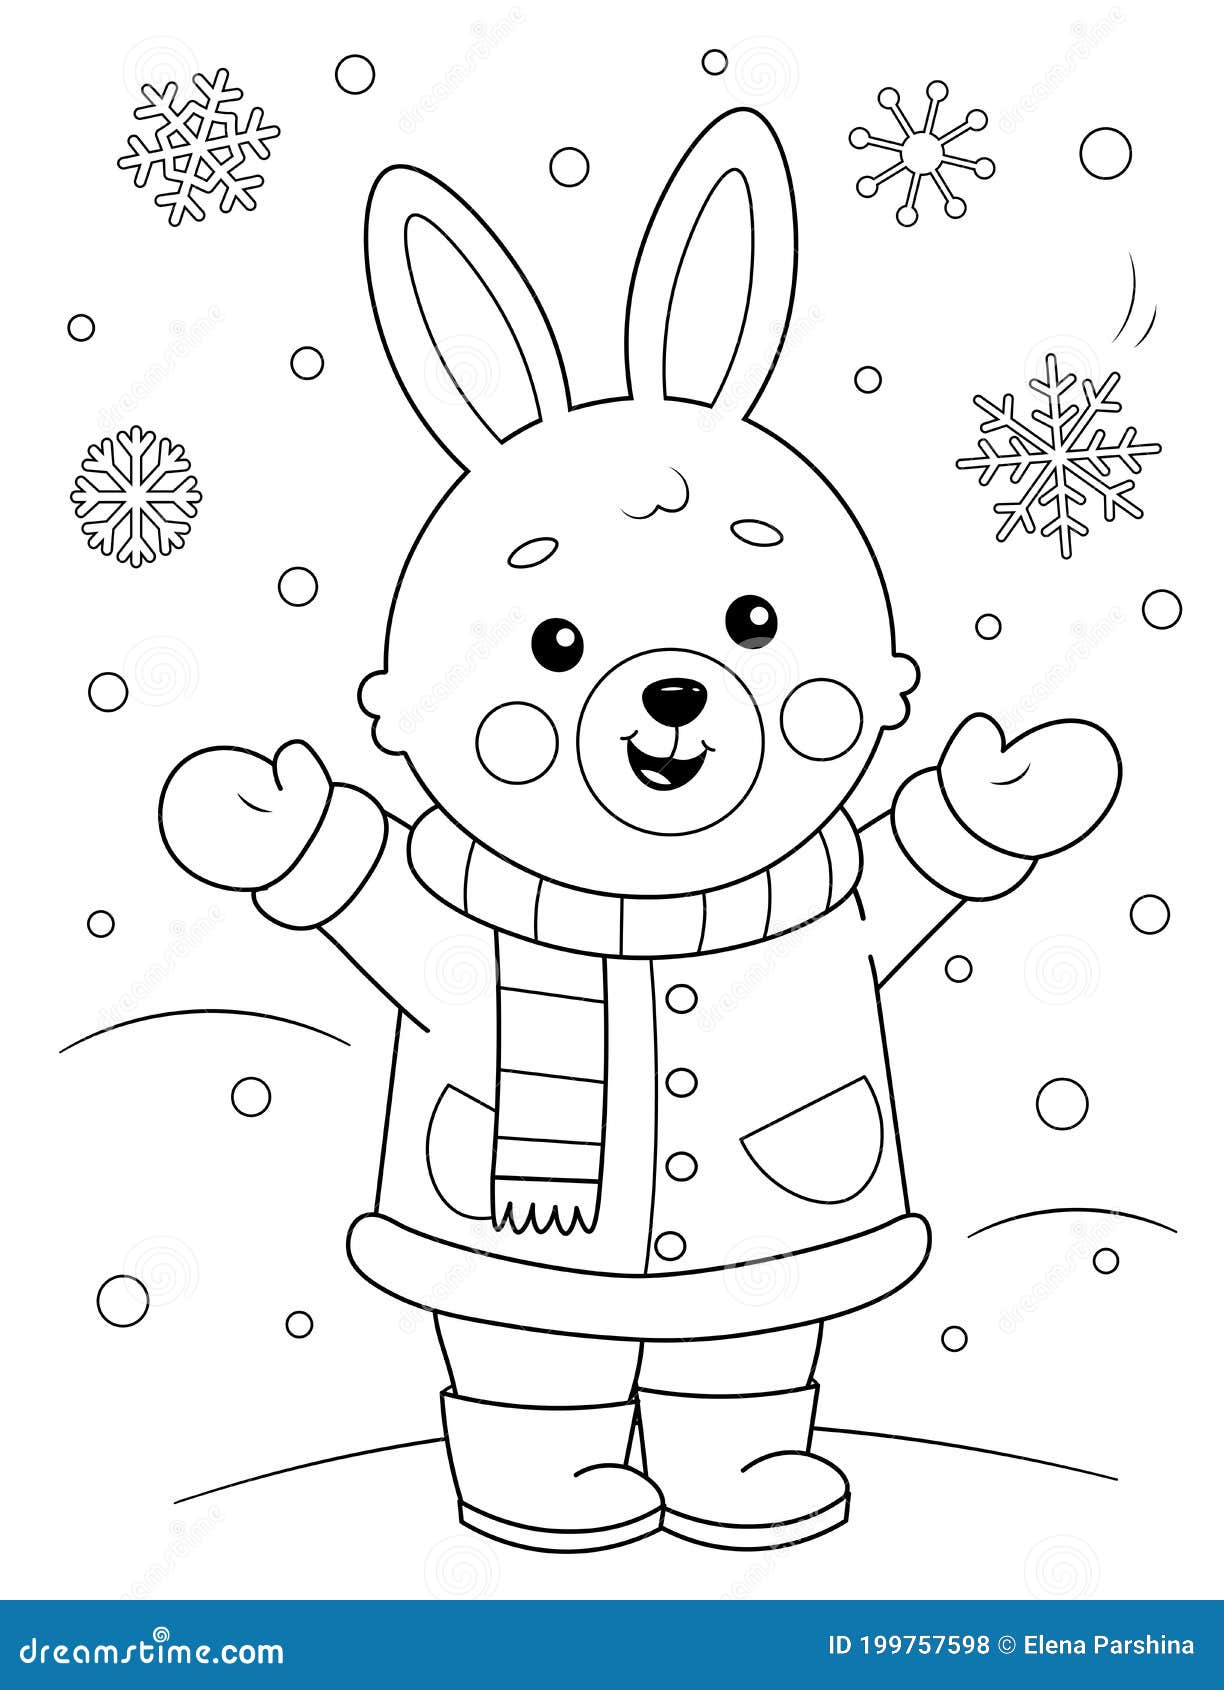 Coloring Page of a Cute Cartoon Bunny in Winter Clothes Enjoying ...